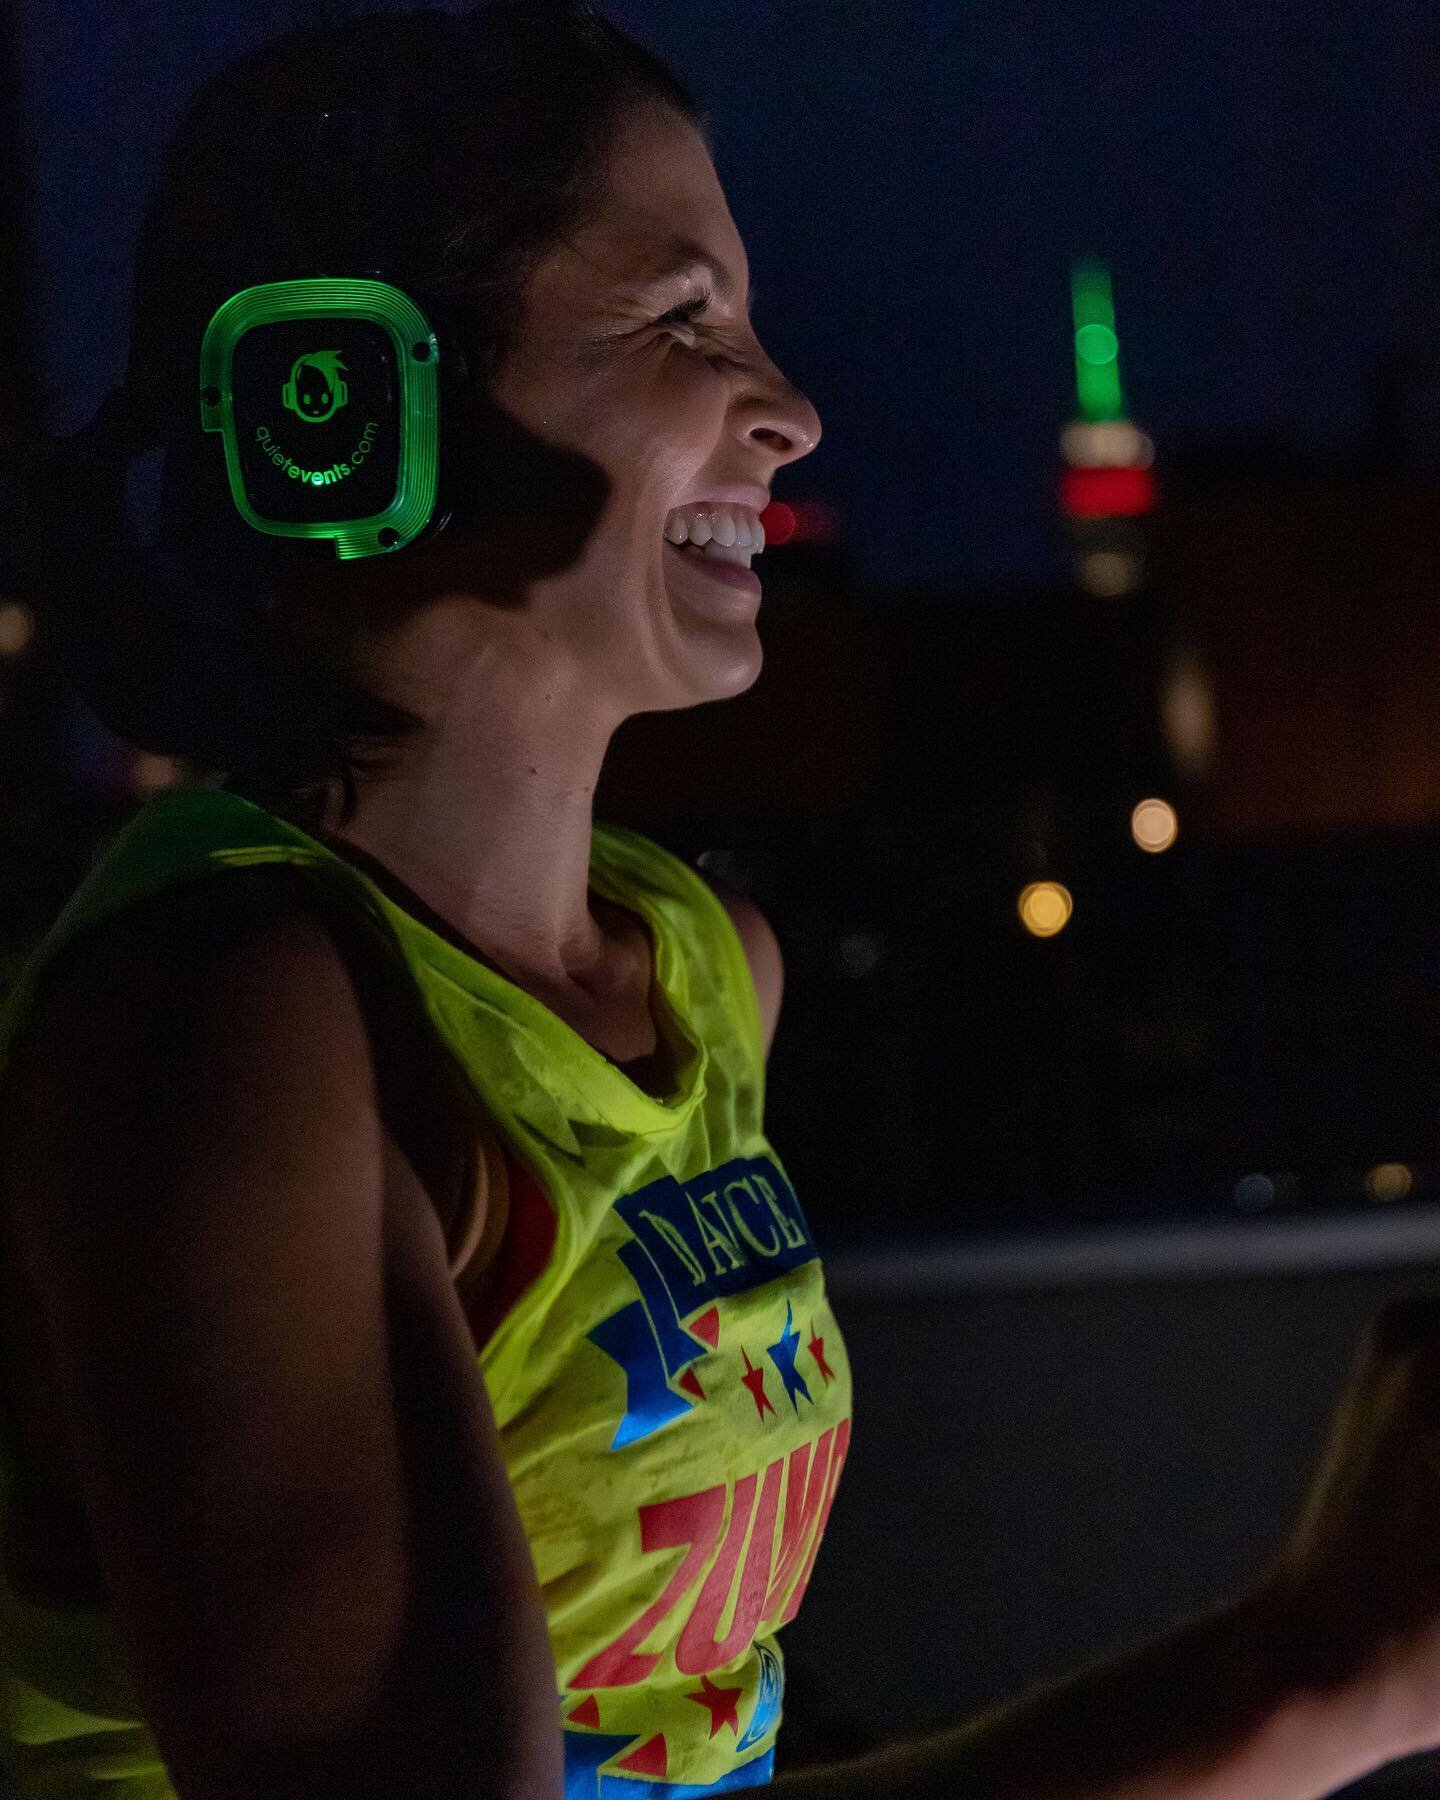 Are you ready for another outdoor Silent Zumba Party in partnership with @quietevents ? 🎧🎶 Join me on Thursday, October 1st @ 7PM 💃🏻 &bull;&bull; 
Masks/face coverings are mandatory. Cannot wait to dance with you! @zumba 
📸 Incredible pictures f